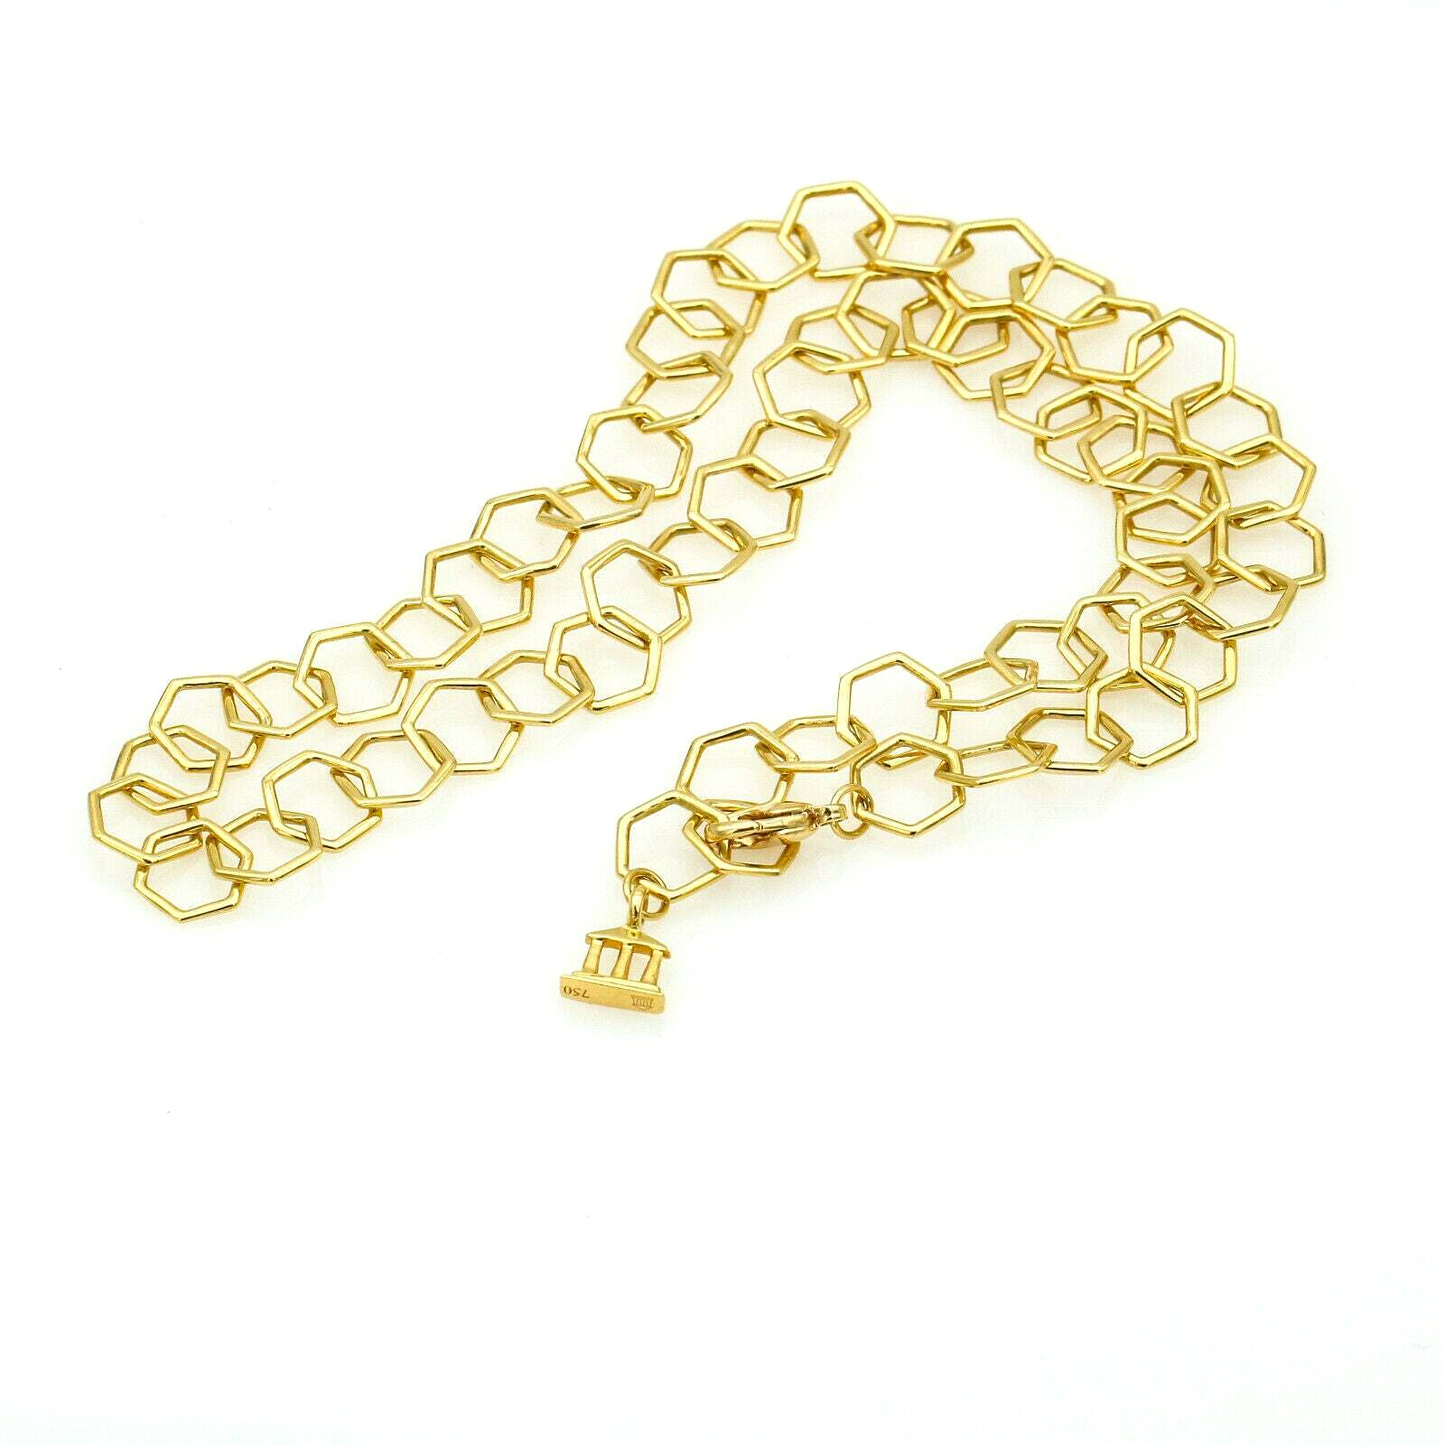 Temple St. Clair Garden Of Earthy Delights Hexagon Link Chain Necklace in 18k Yellow Gold